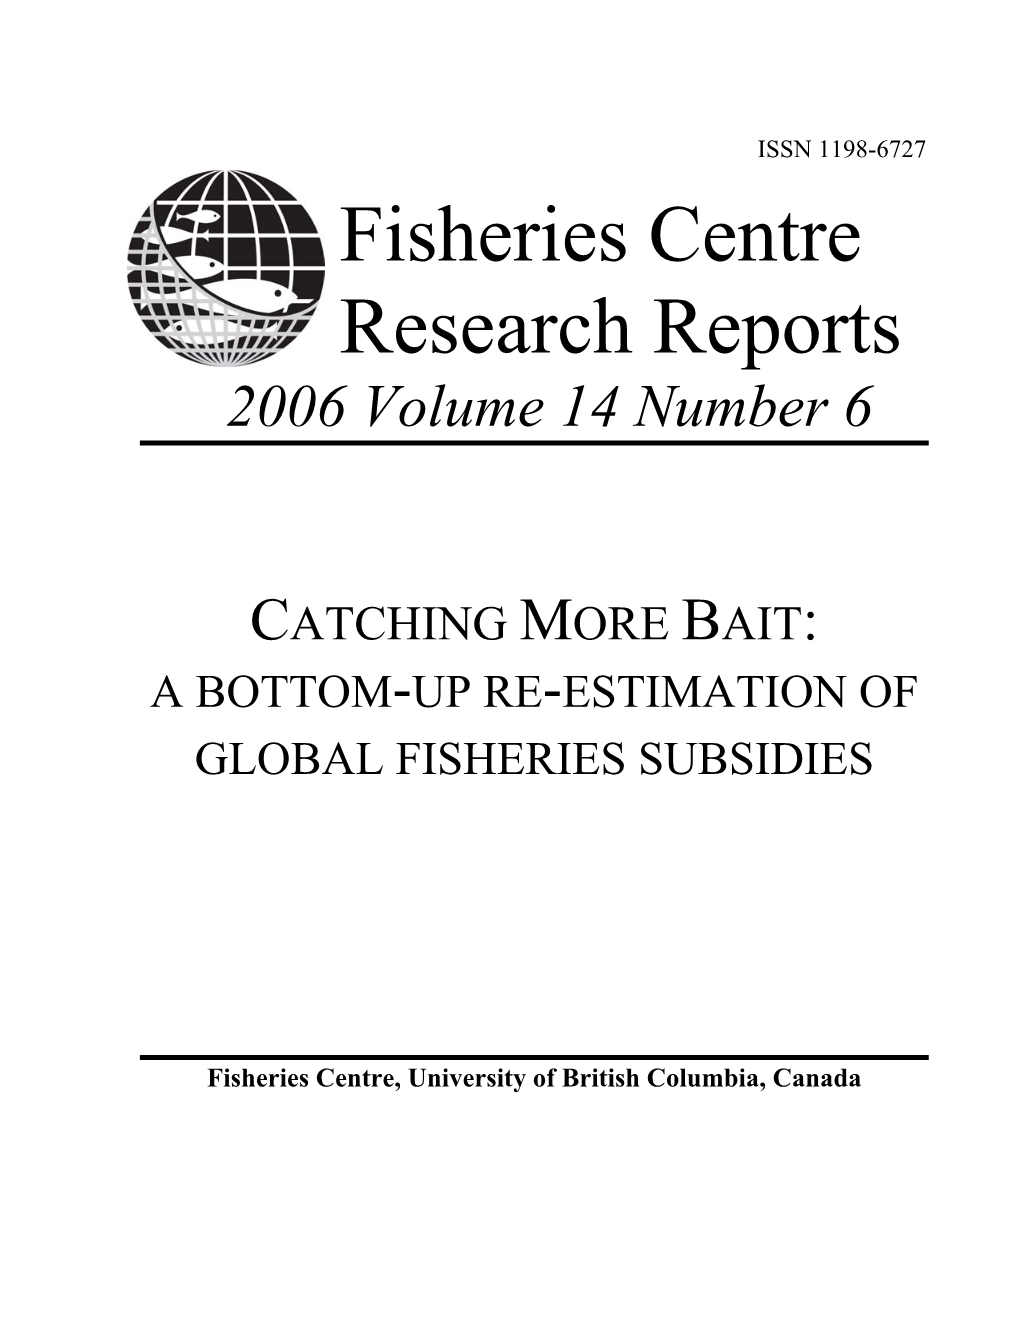 Fisheries Centre Research Reports 2006 Volume 14 Number 6